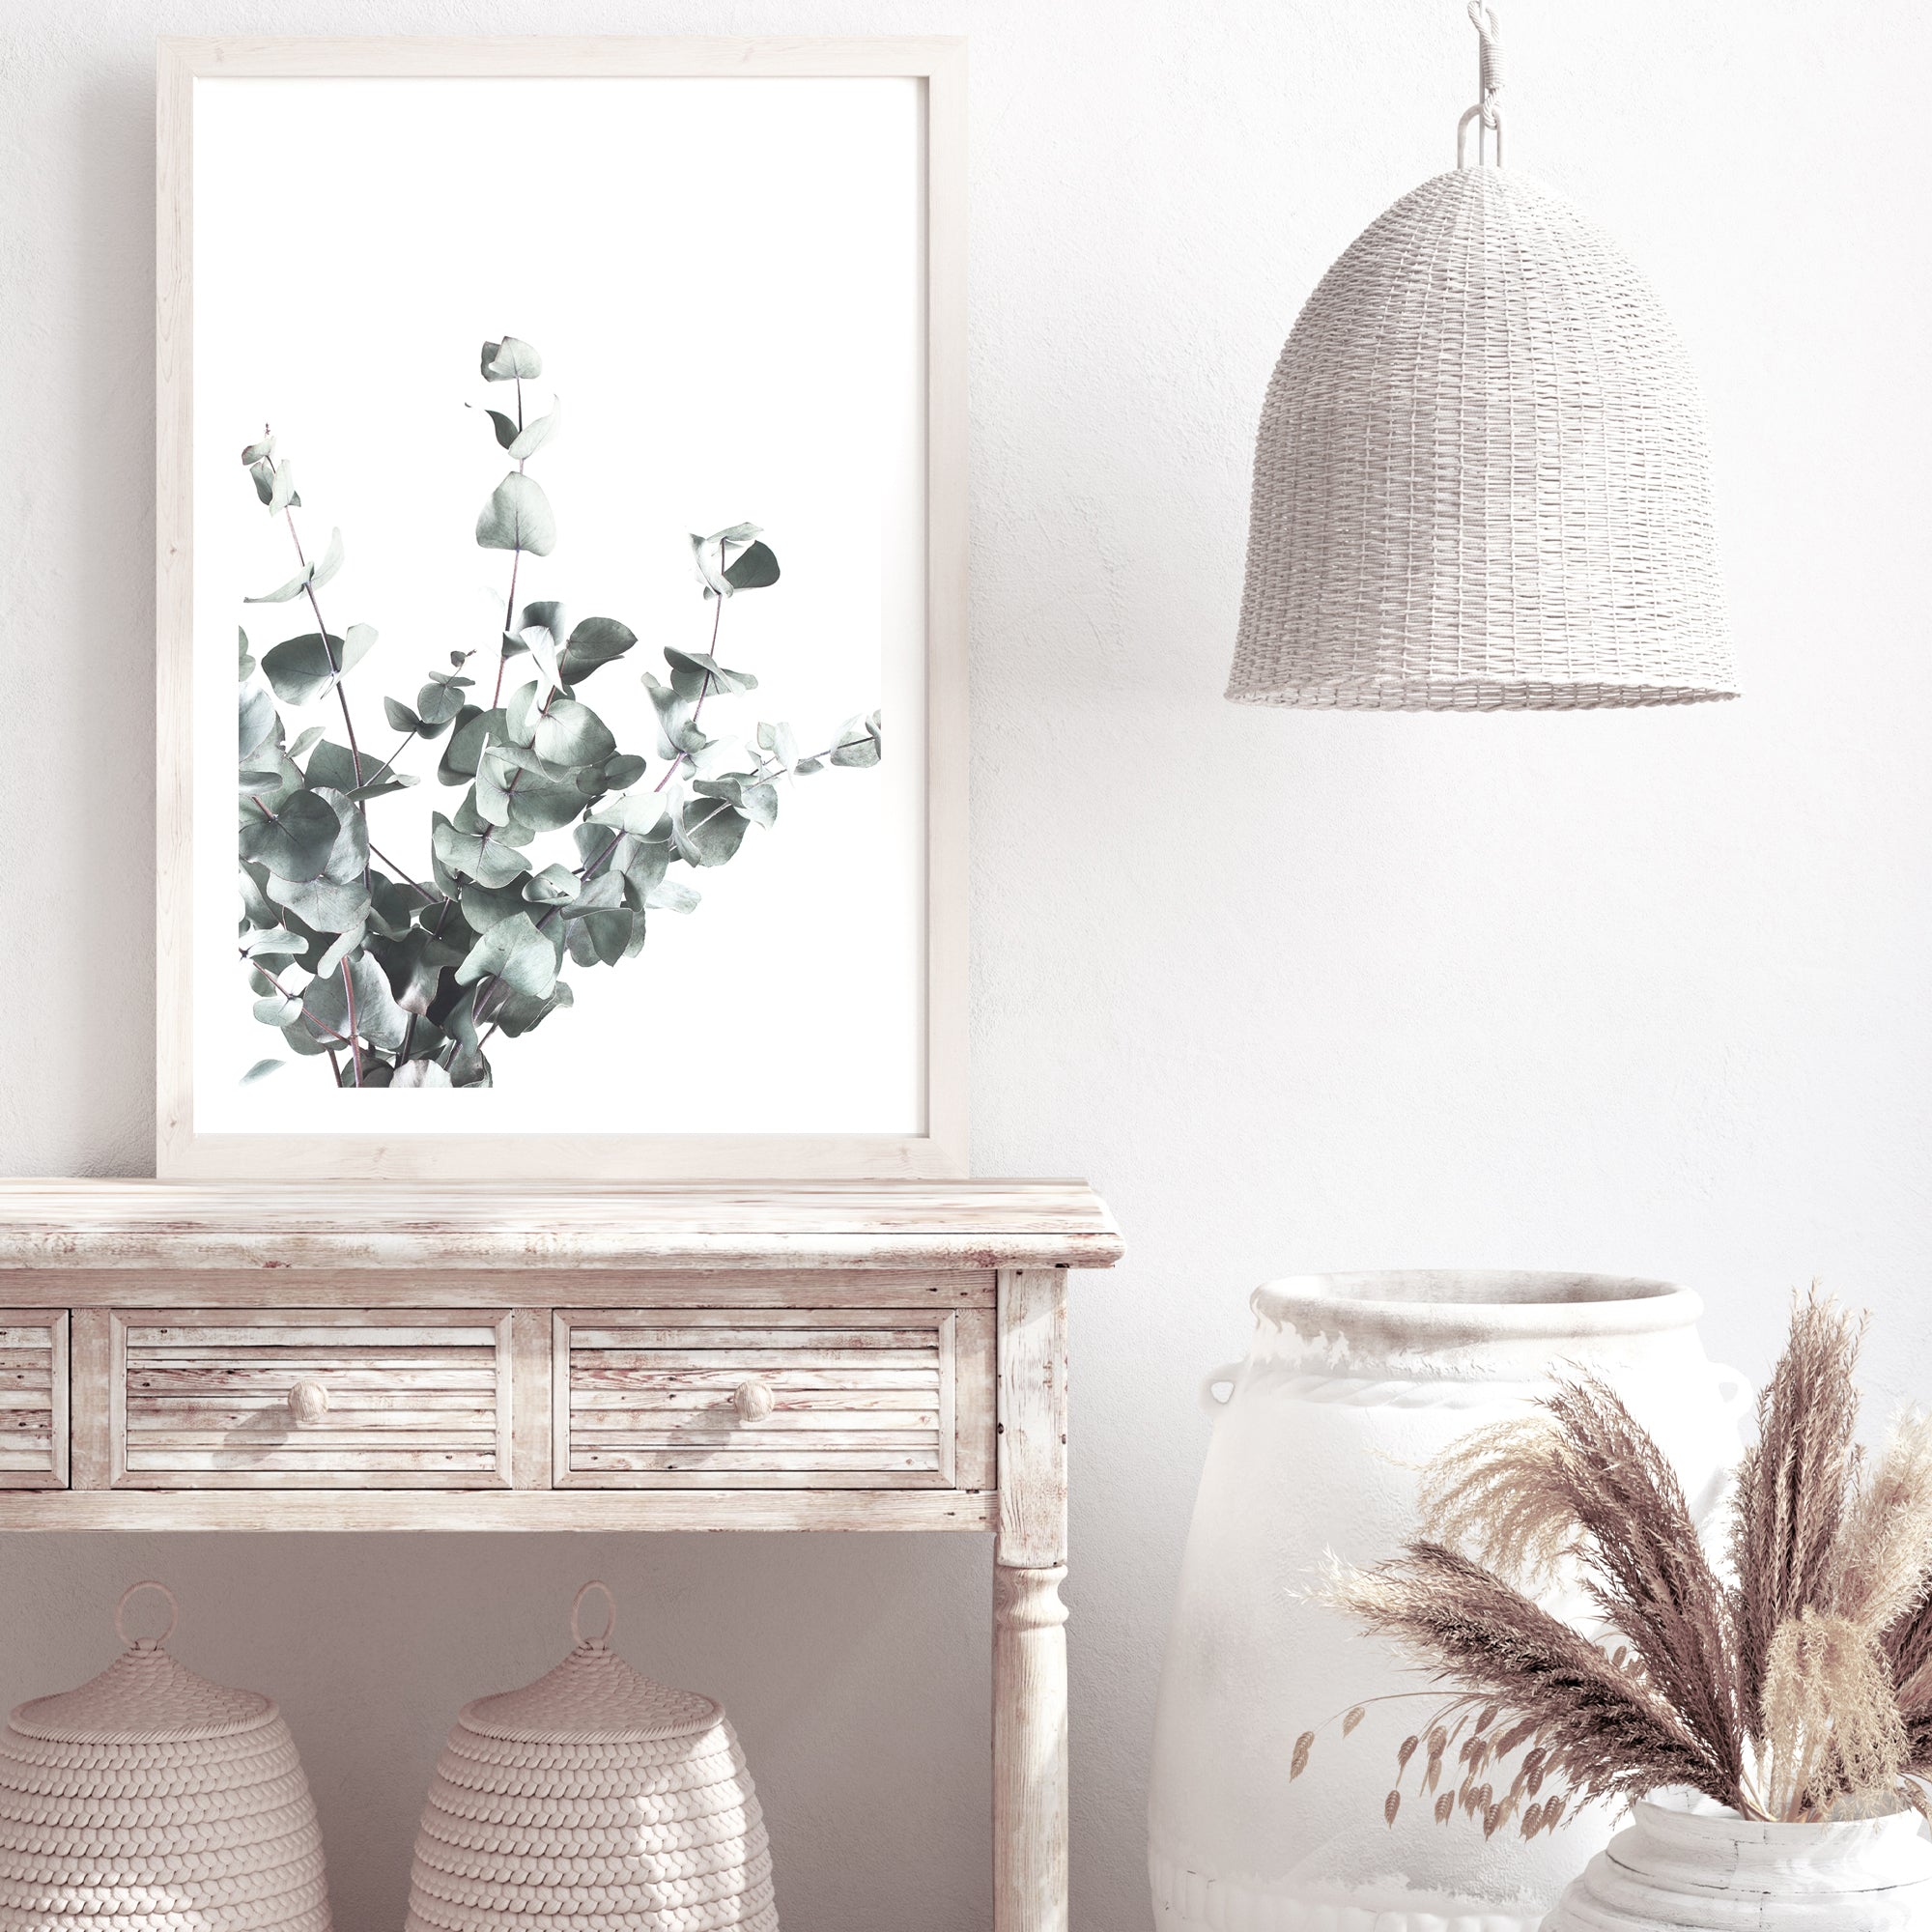 A framed or unframed artwork feauturing eucalyptus leaves (A)with a light background available as a canvas or photo print.